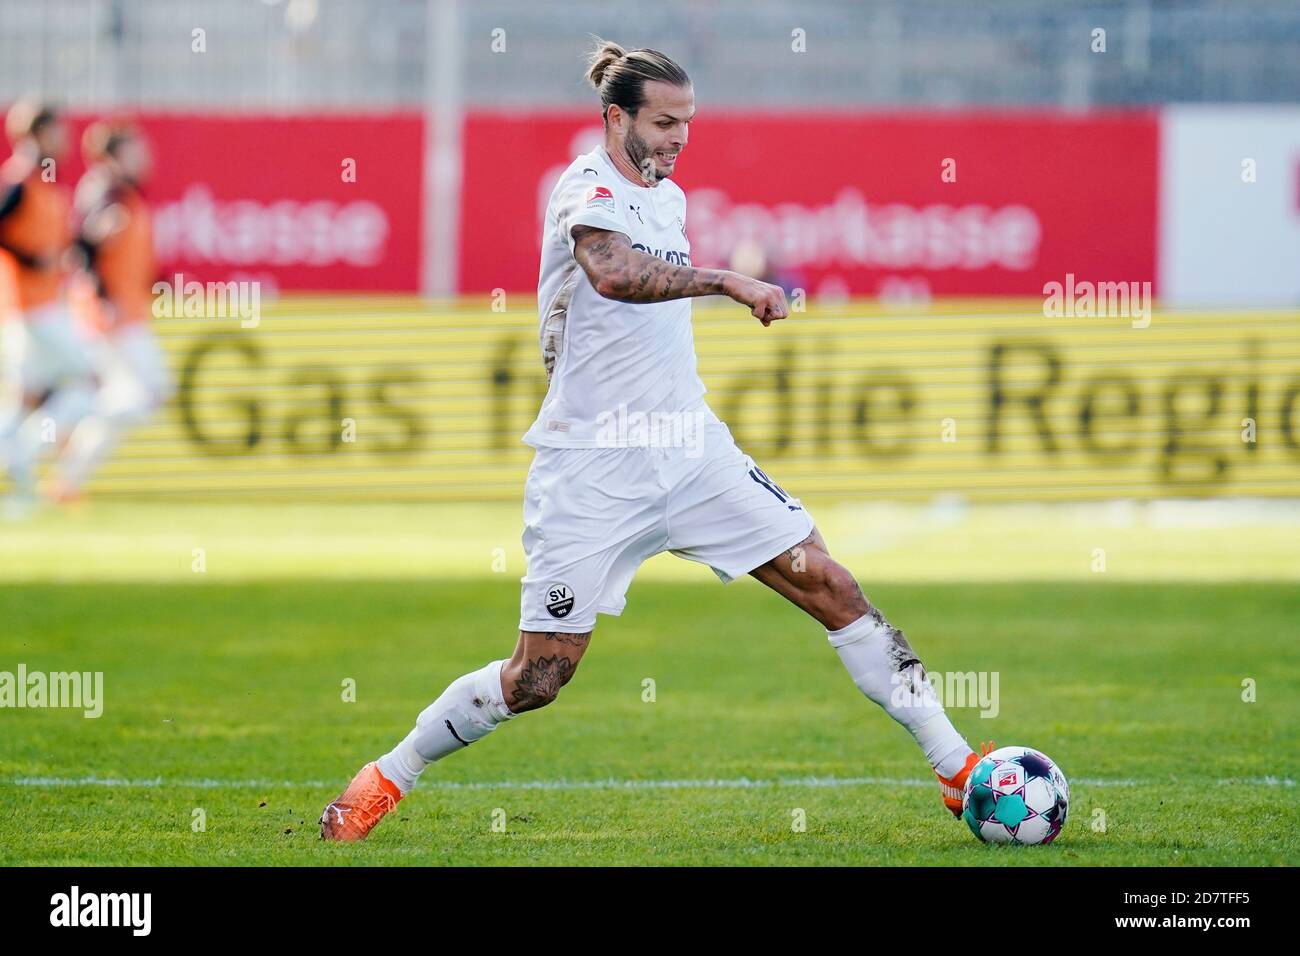 Sandhausen, Germany. 25th Oct, 2020. Football: 2nd Bundesliga, SV Sandhausen - SC Paderborn 07, 5th matchday, at the Hardtwaldstadion. Sandhausens Dennis Diekmeier plays the ball. Credit: Uwe Anspach/dpa - IMPORTANT NOTE: In accordance with the regulations of the DFL Deutsche Fußball Liga and the DFB Deutscher Fußball-Bund, it is prohibited to exploit or have exploited in the stadium and/or from the game taken photographs in the form of sequence images and/or video-like photo series./dpa/Alamy Live News Stock Photo